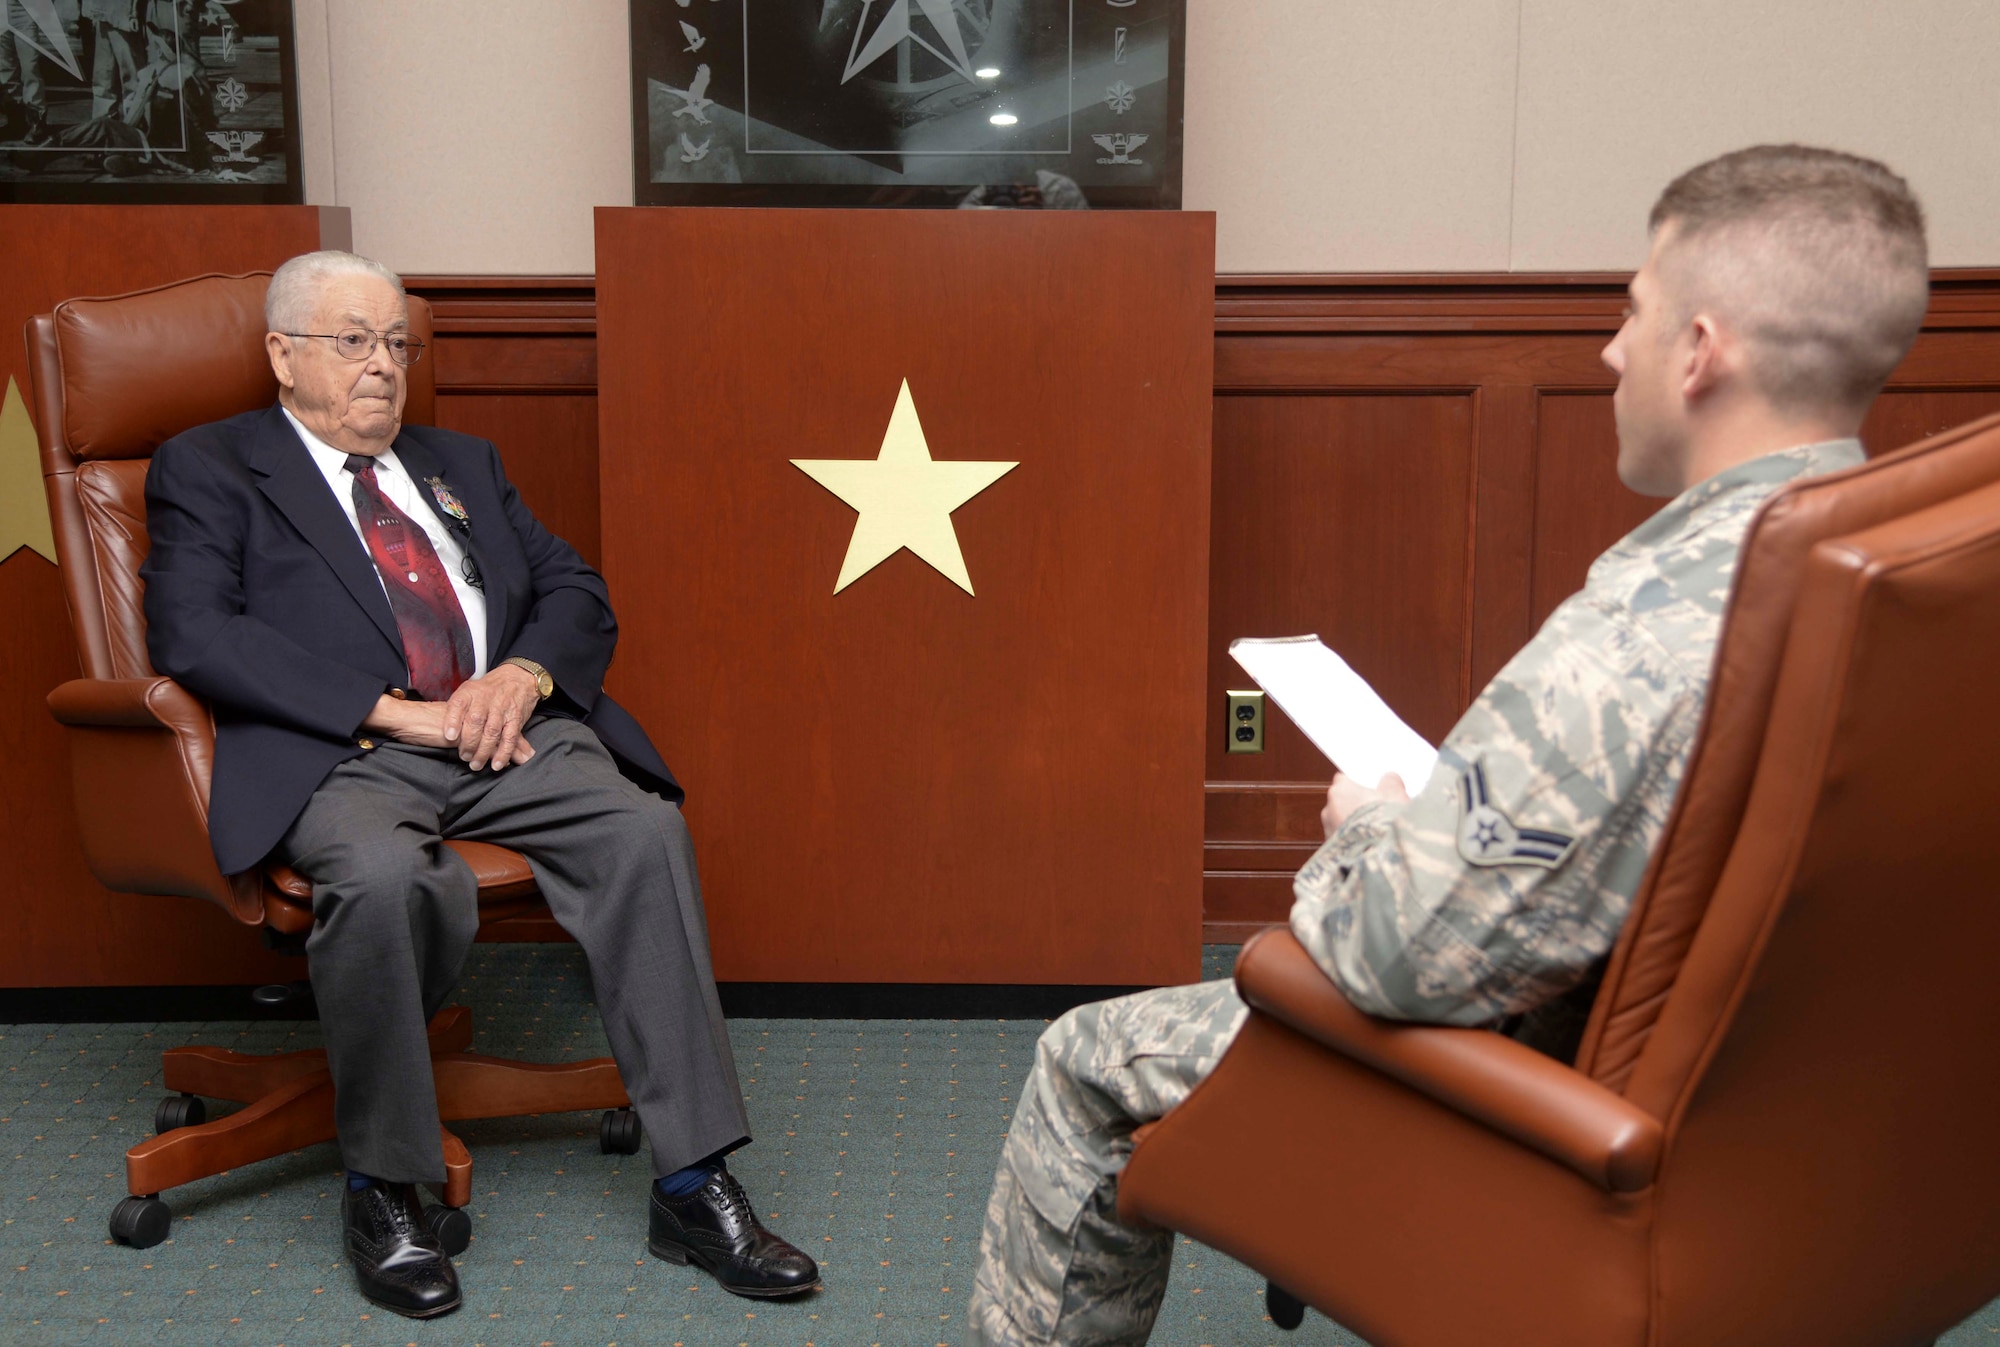 (Left) Retired Lt. Col. George E. Hardy, a Tuskegee Airman, is interviewed by Airman 1st Class Brad Tipton, a broadcaster assigned to the 6th Air Mobility Wing, prior to the “A Salute To A Living Legend” event at MacDill Air Force Base, Fla., Feb. 11, 2016. Hardy was invited to speak to an audience of more than 140 people at the Davis Conference Center. (U.S. Air Force photo by Senior Airman Vernon L. Fowler Jr.)
